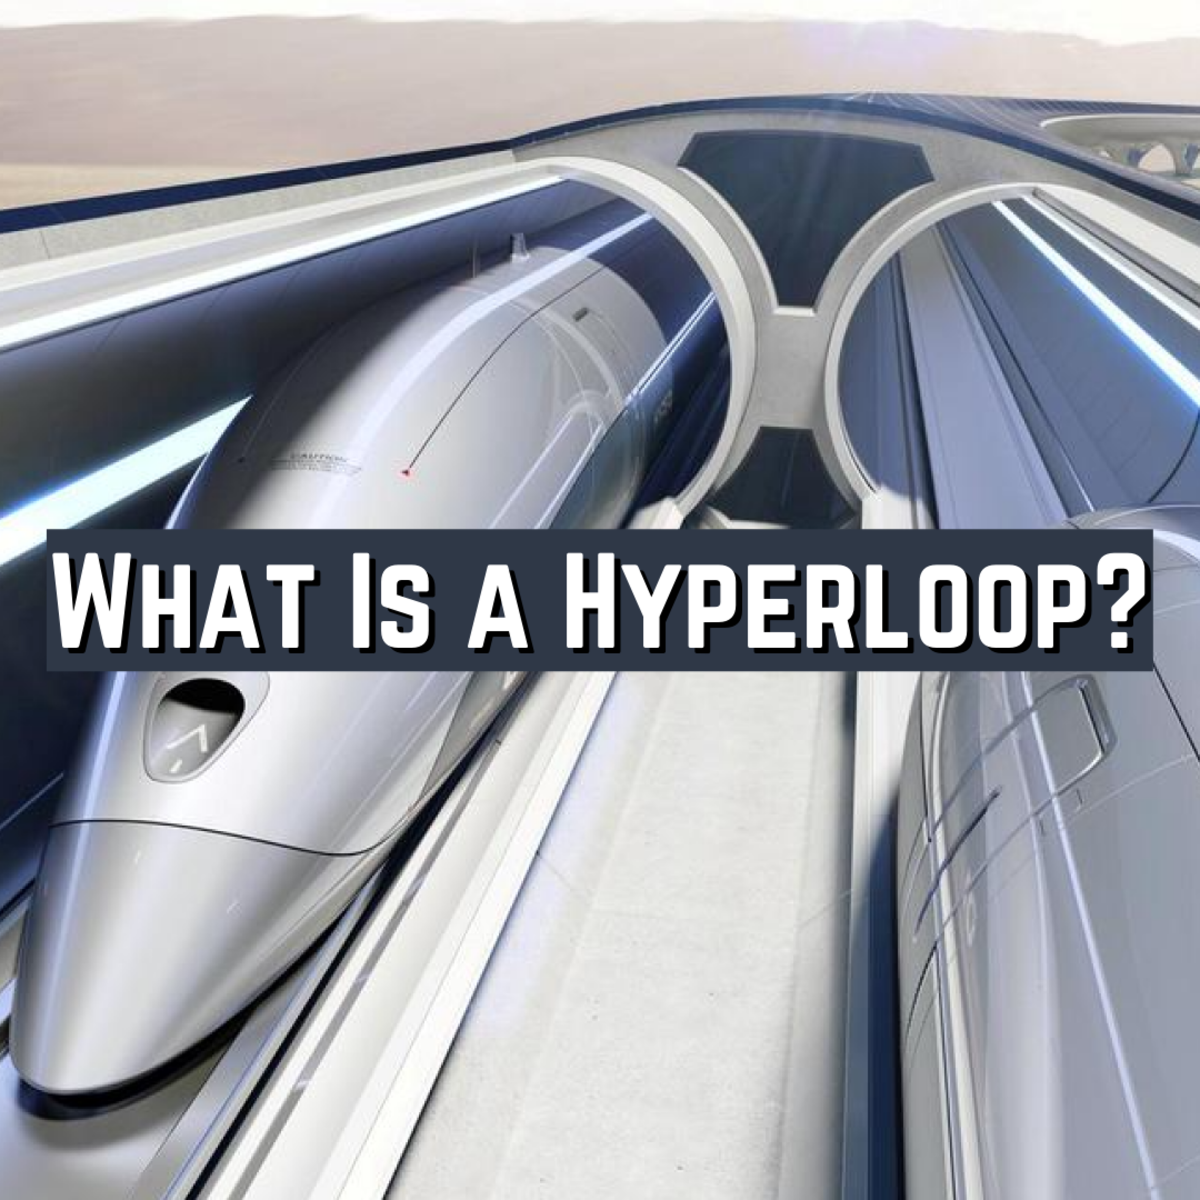 Read on to discover what a hyperloop is. This revolutionary transportation technology was called the fifth mode of transportation by Elon Musk.